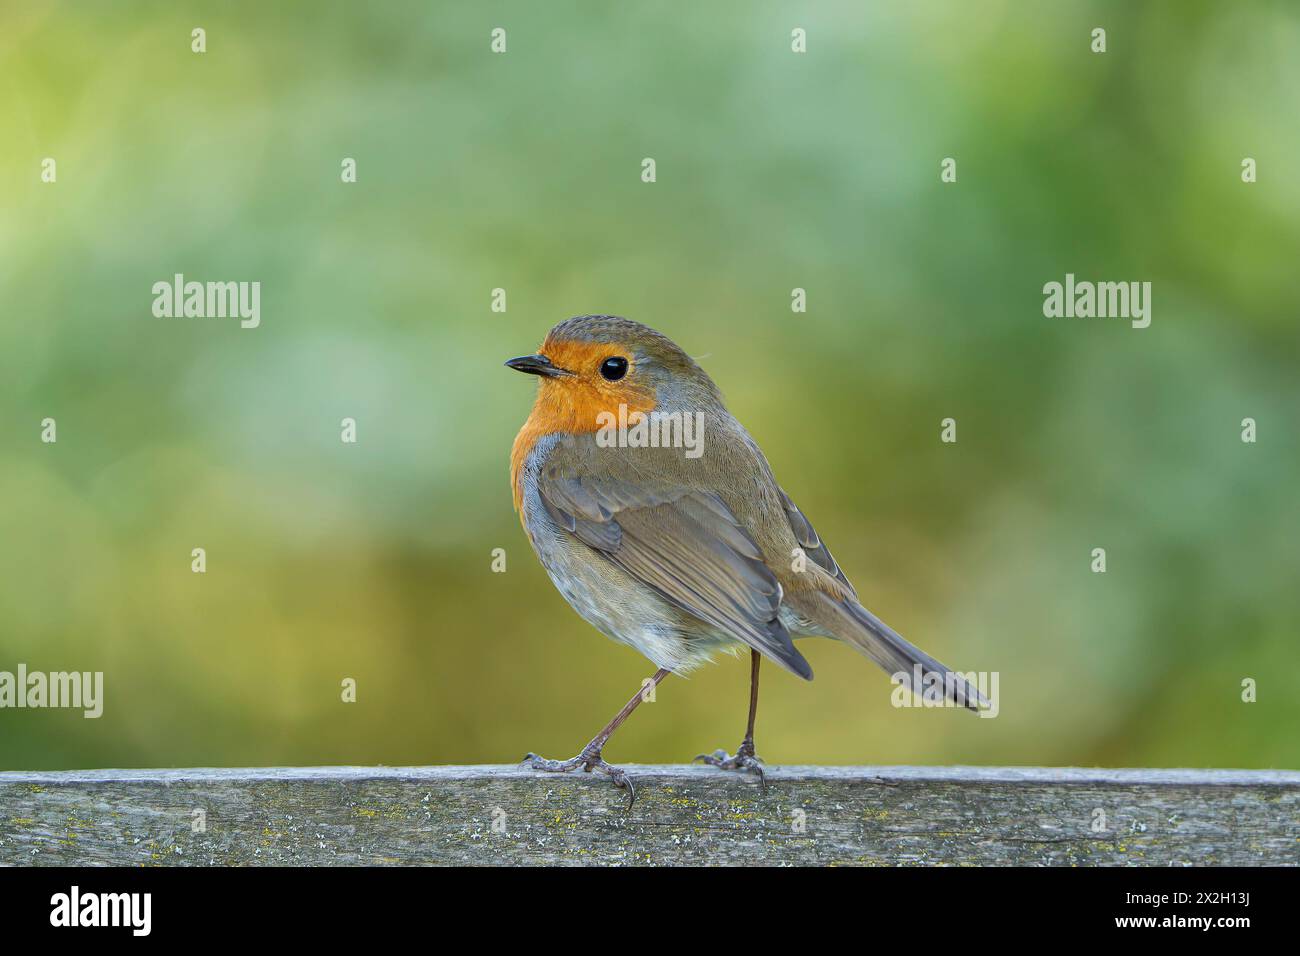 Close up detailed side view of a robin bird with it's head tilted up on a sunny day. The bird is perched on a wood rail which is covered in lichen. Th Stock Photo